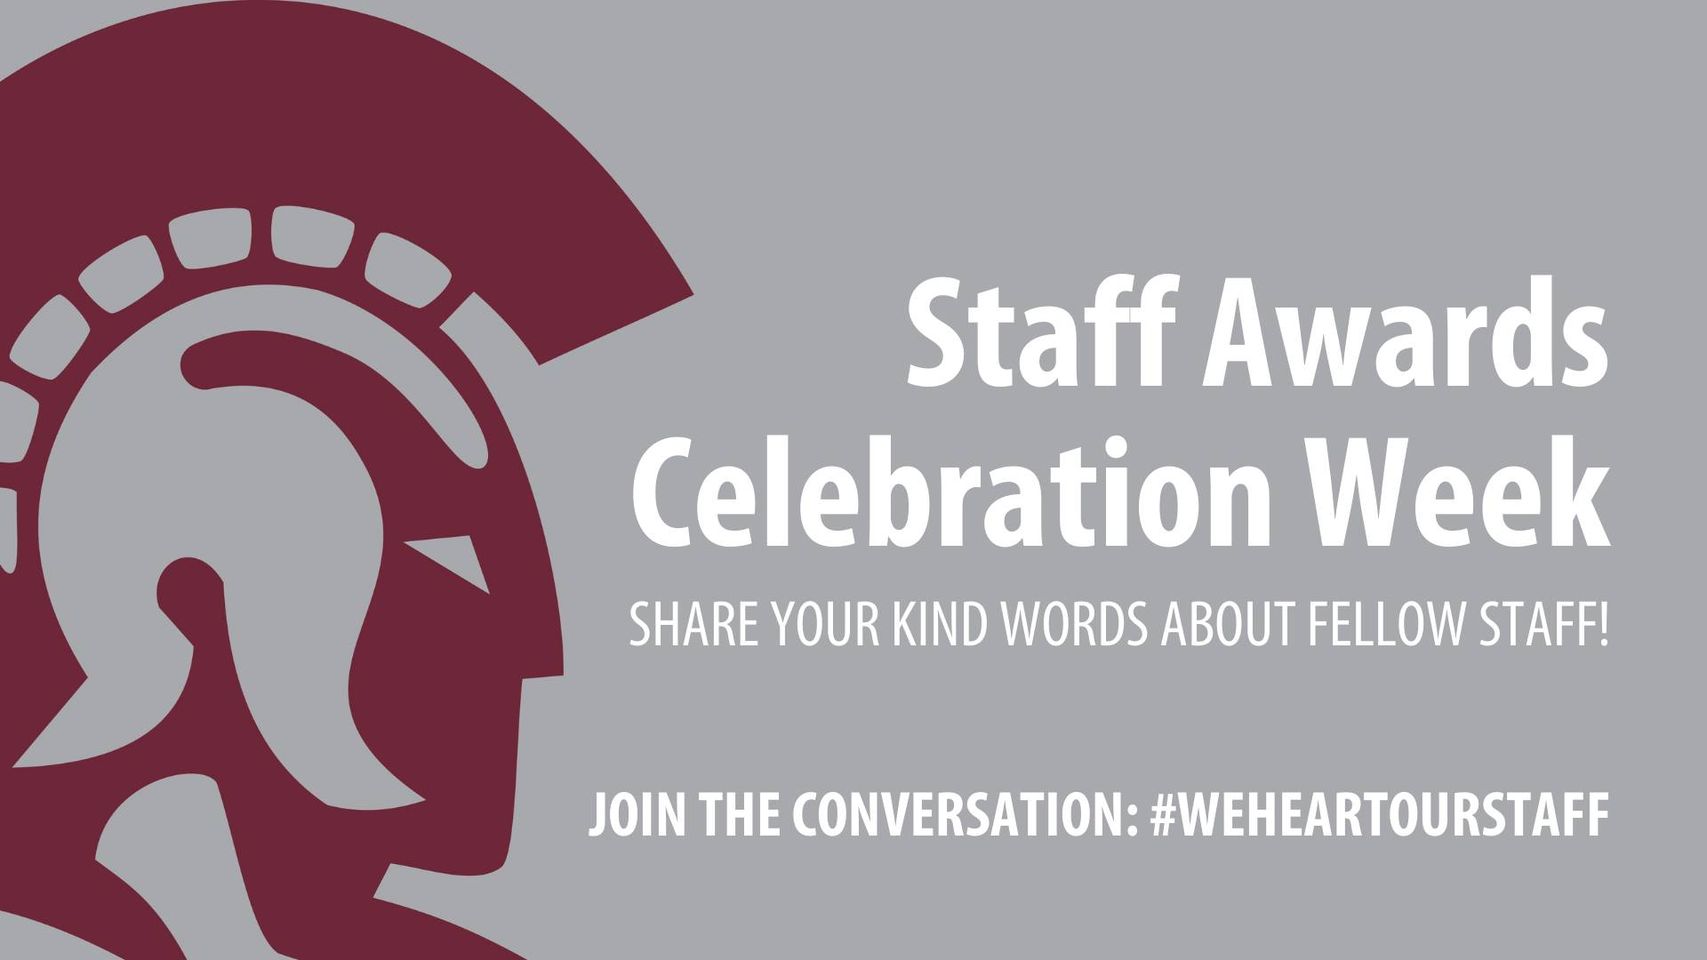 The 2021 Staff Celebration Week will be April 5-9.